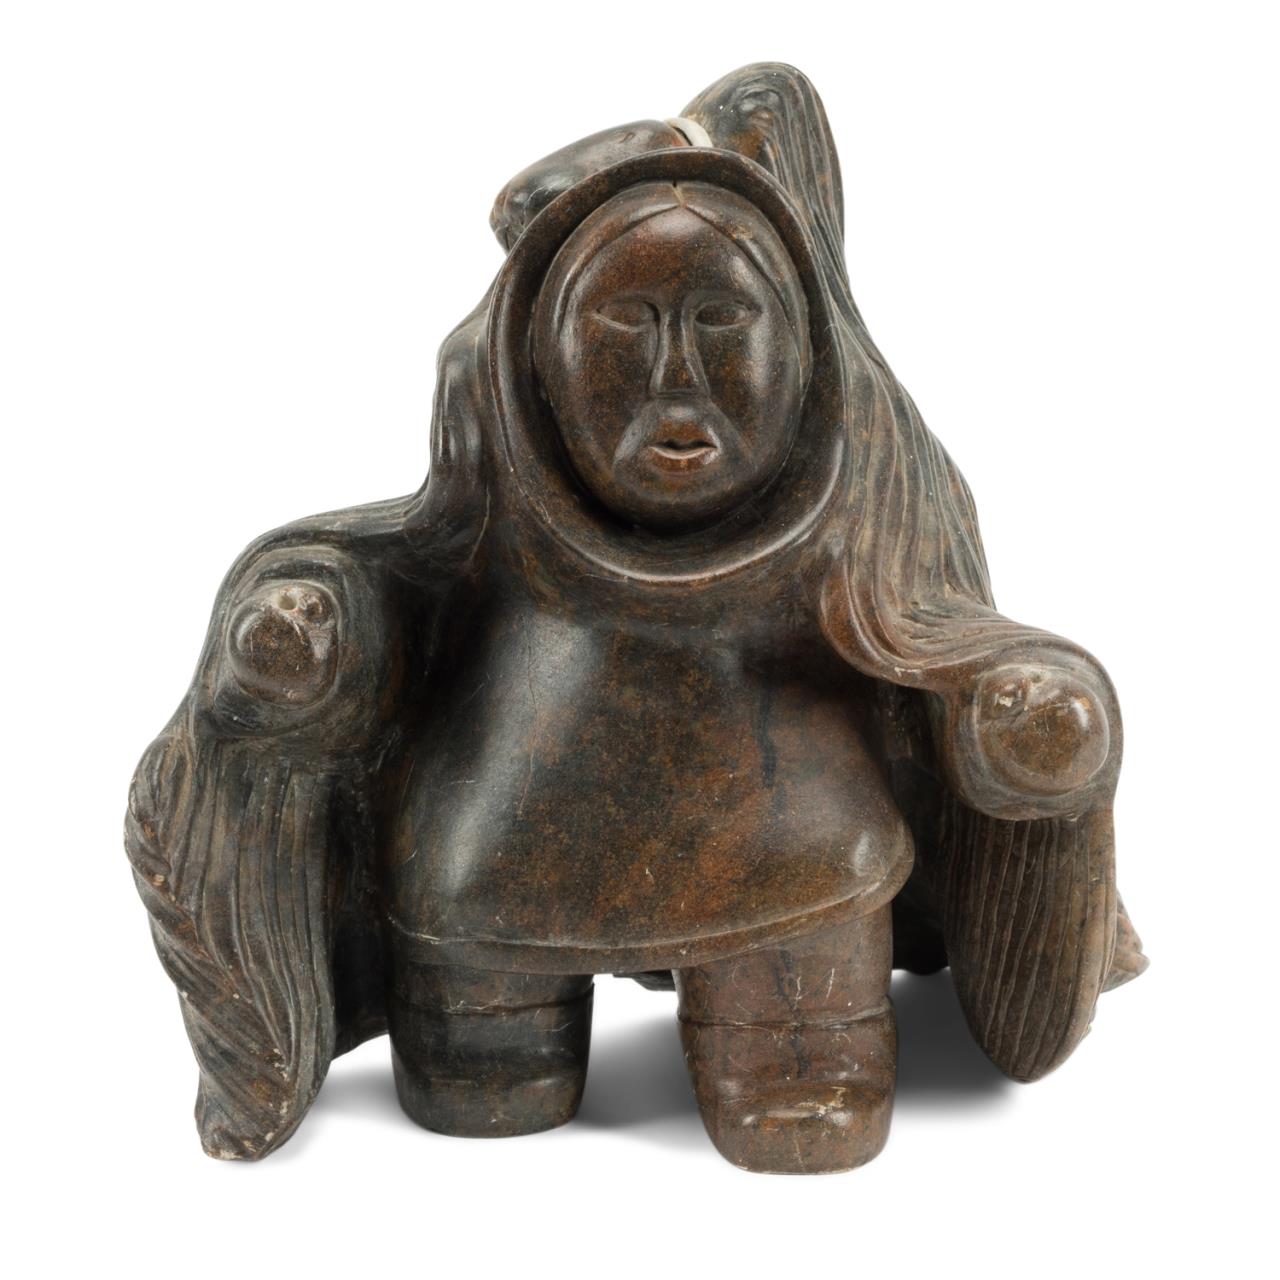 SIGNED INUIT CARVING OF A SHAMAN